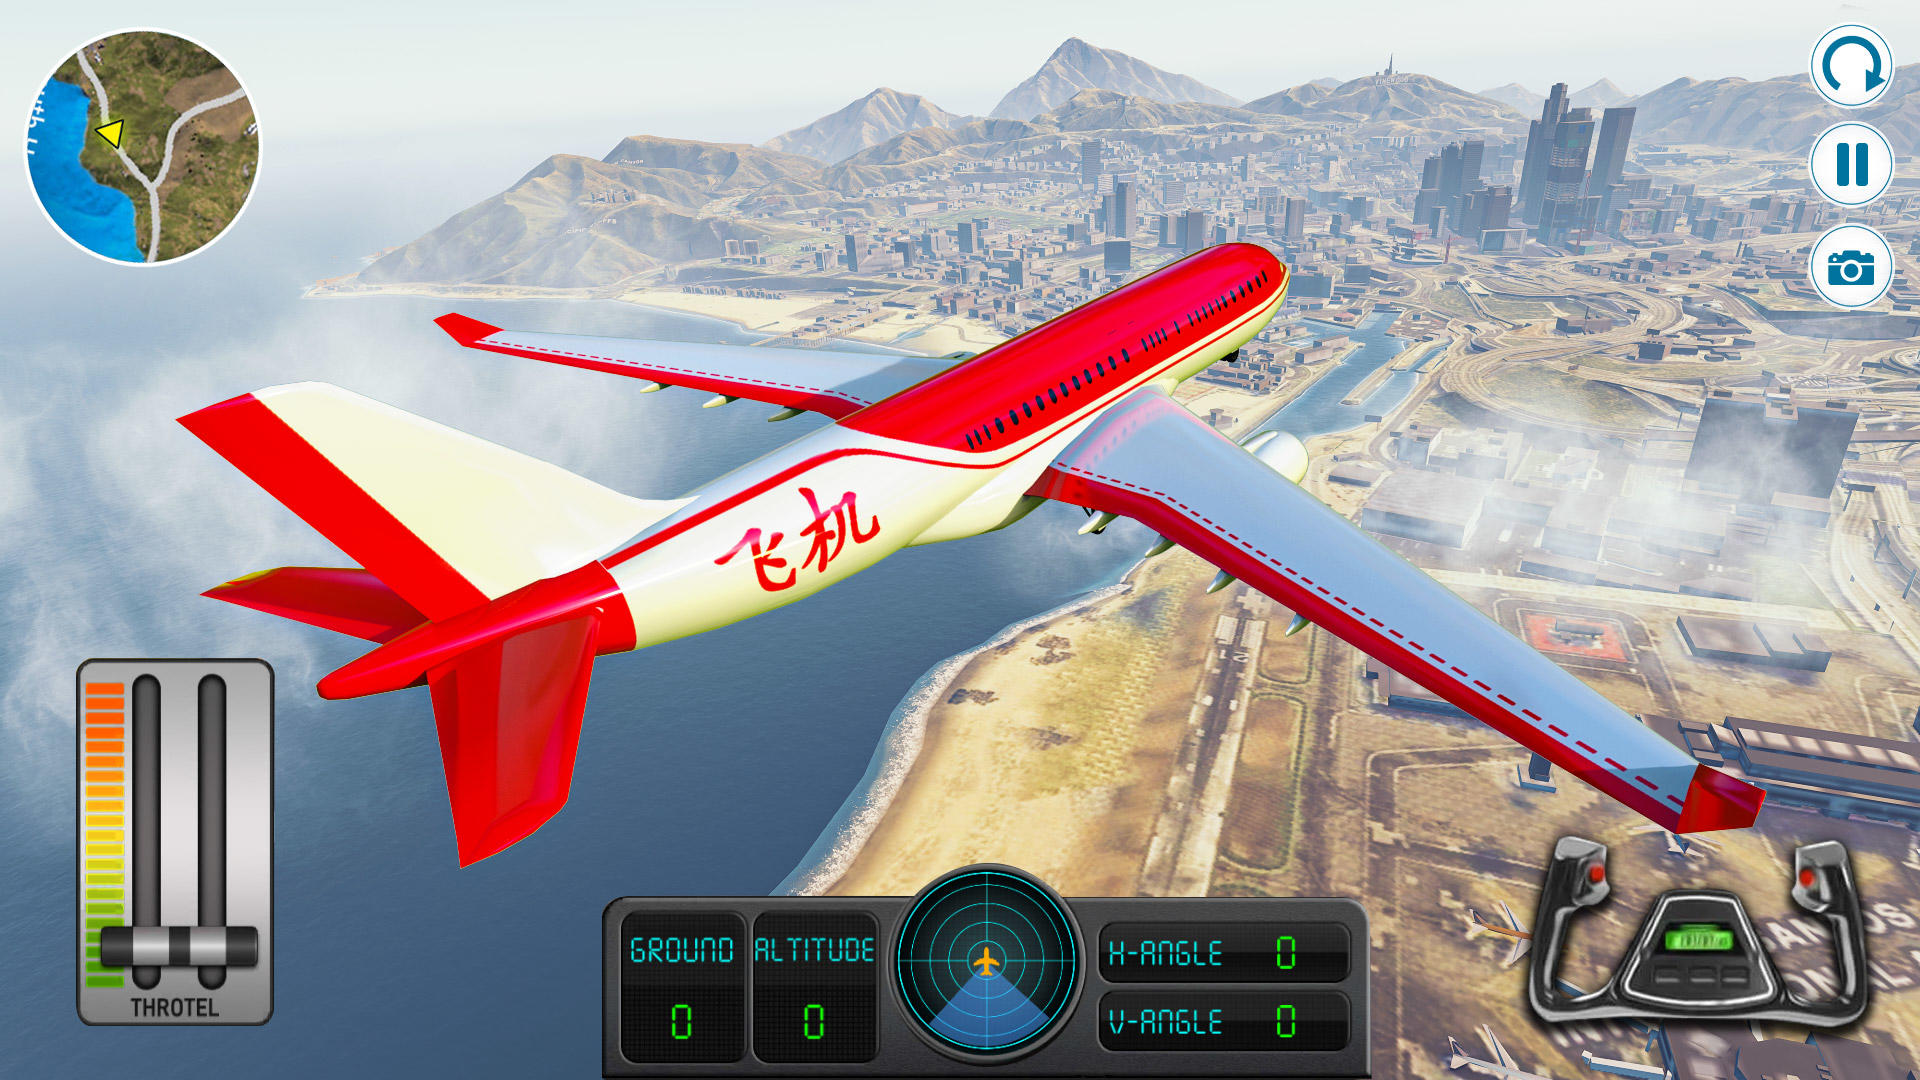 Flight Simulator airplane Games: Extreme Flying Plane simulator games  offline::Appstore for Android